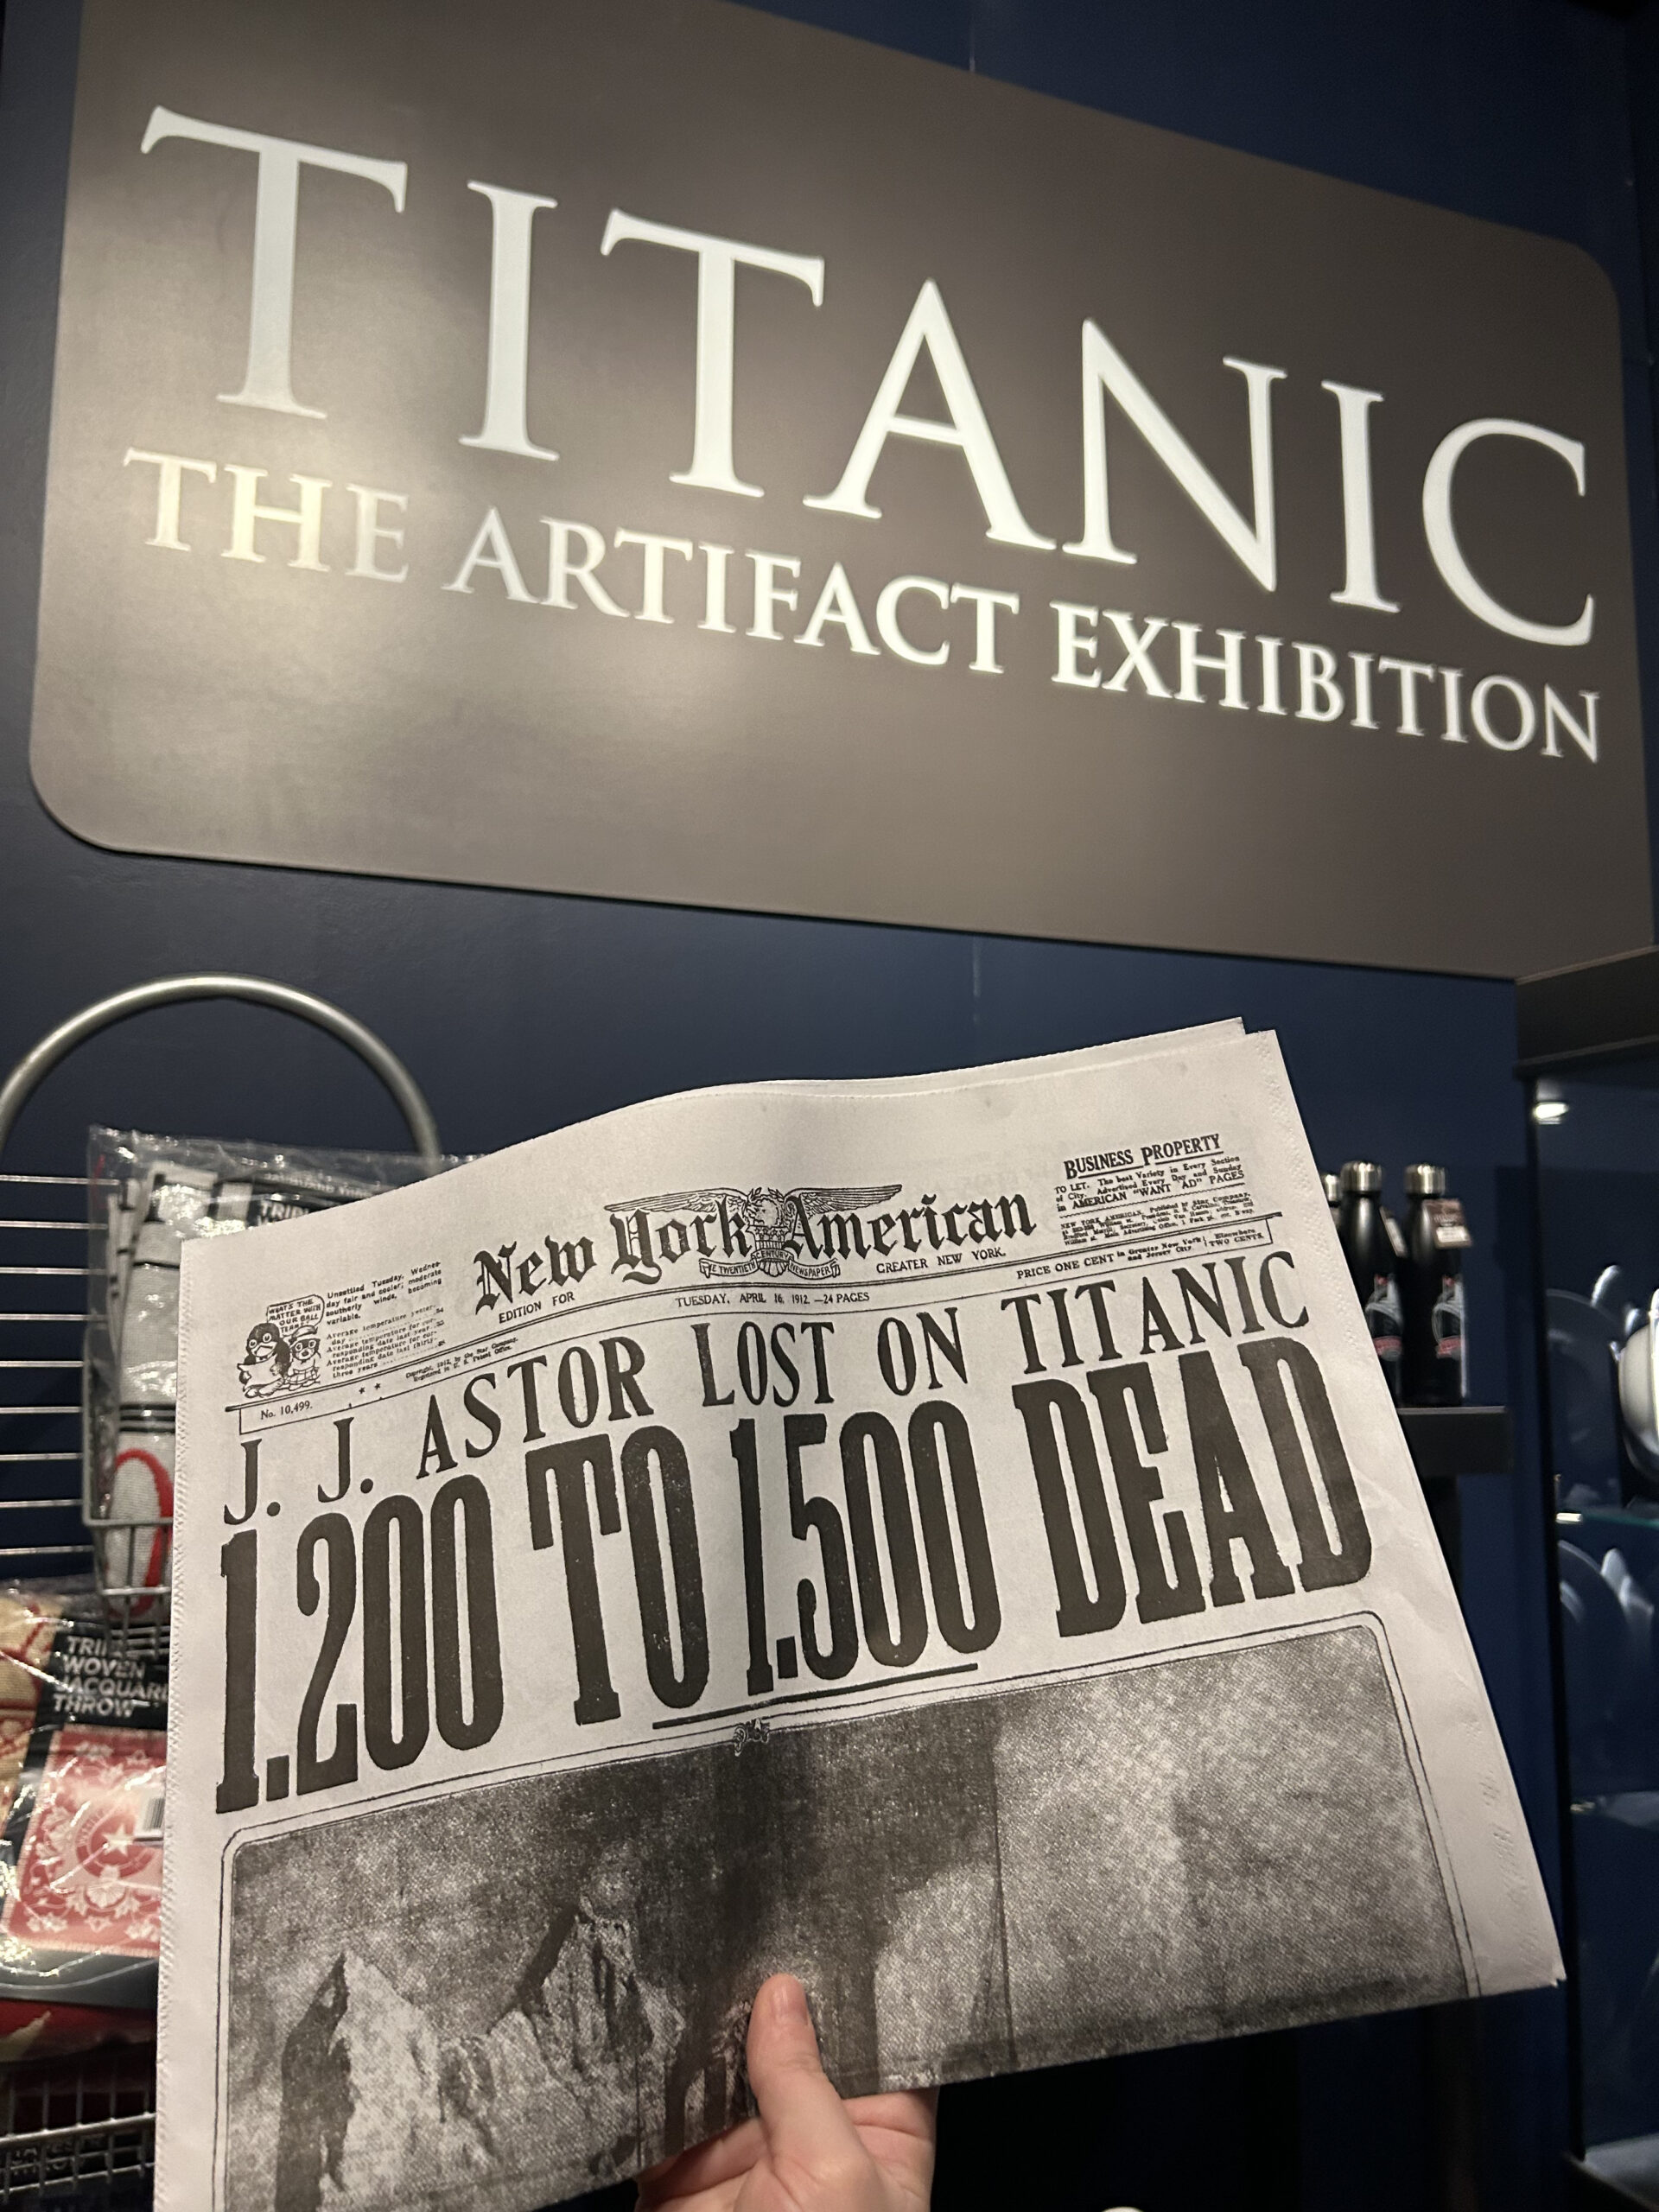 A photo of someone holding up a replica newspaper up next to the "TITANIC: THE ARTIFACT EXHIBITION" sign.